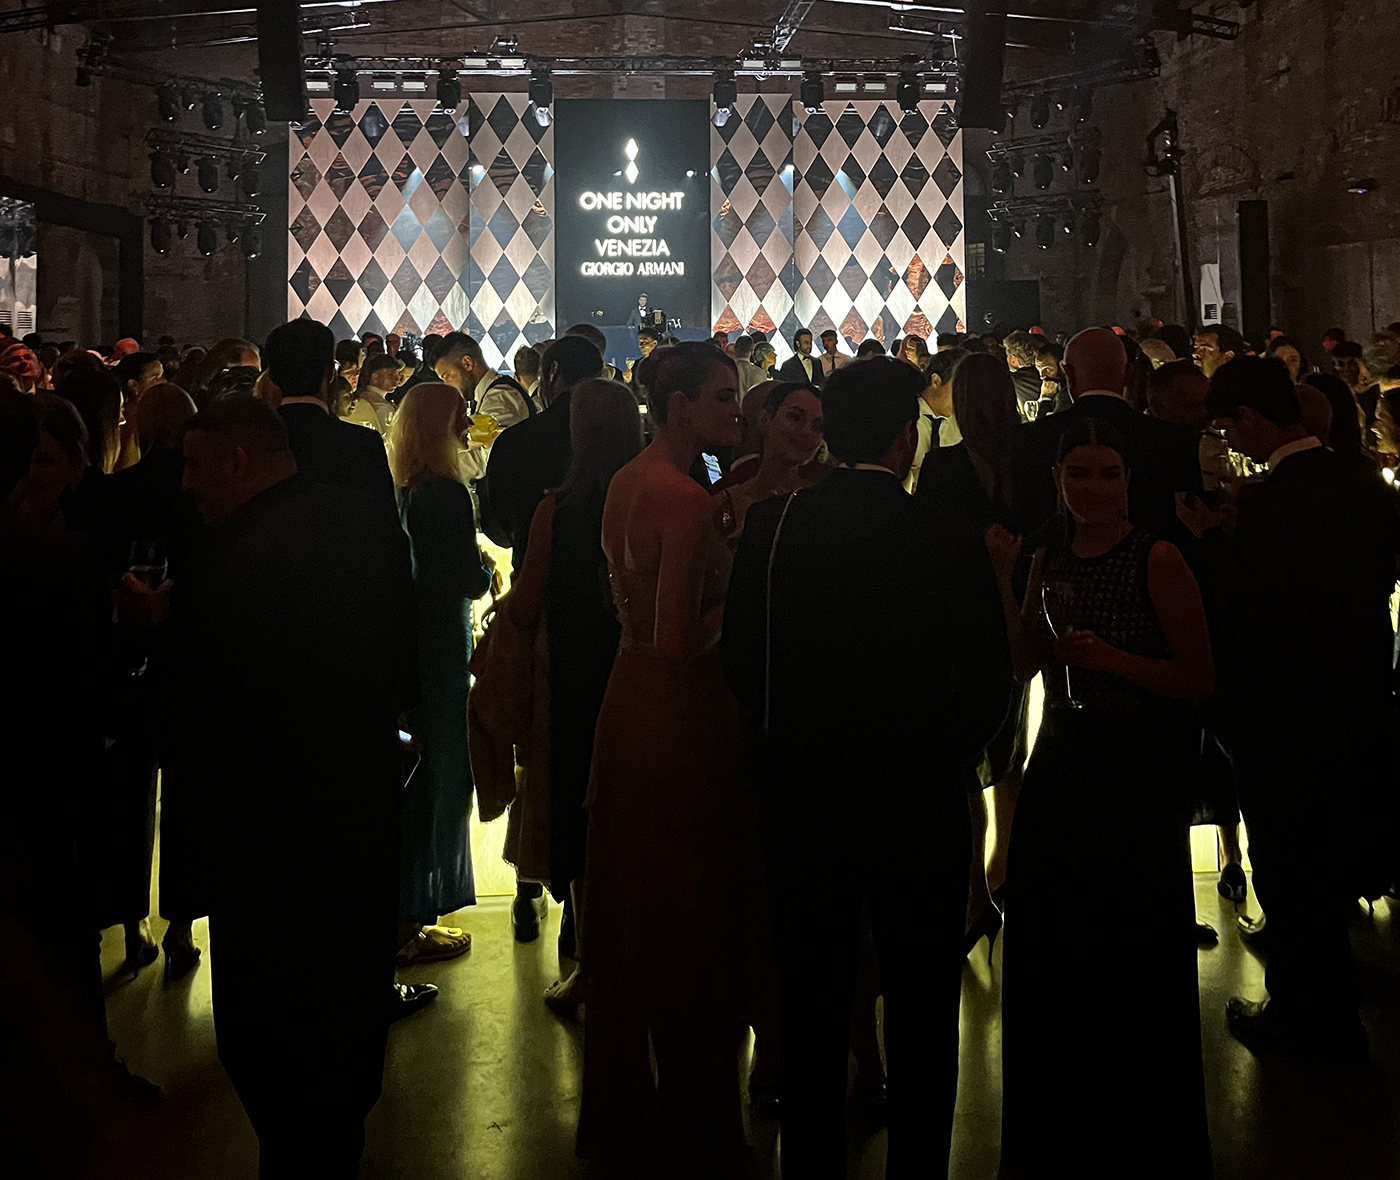 he One Night Only Venezia event during the 80th Mostra , photo by Marco Tassini for EDGE magazine